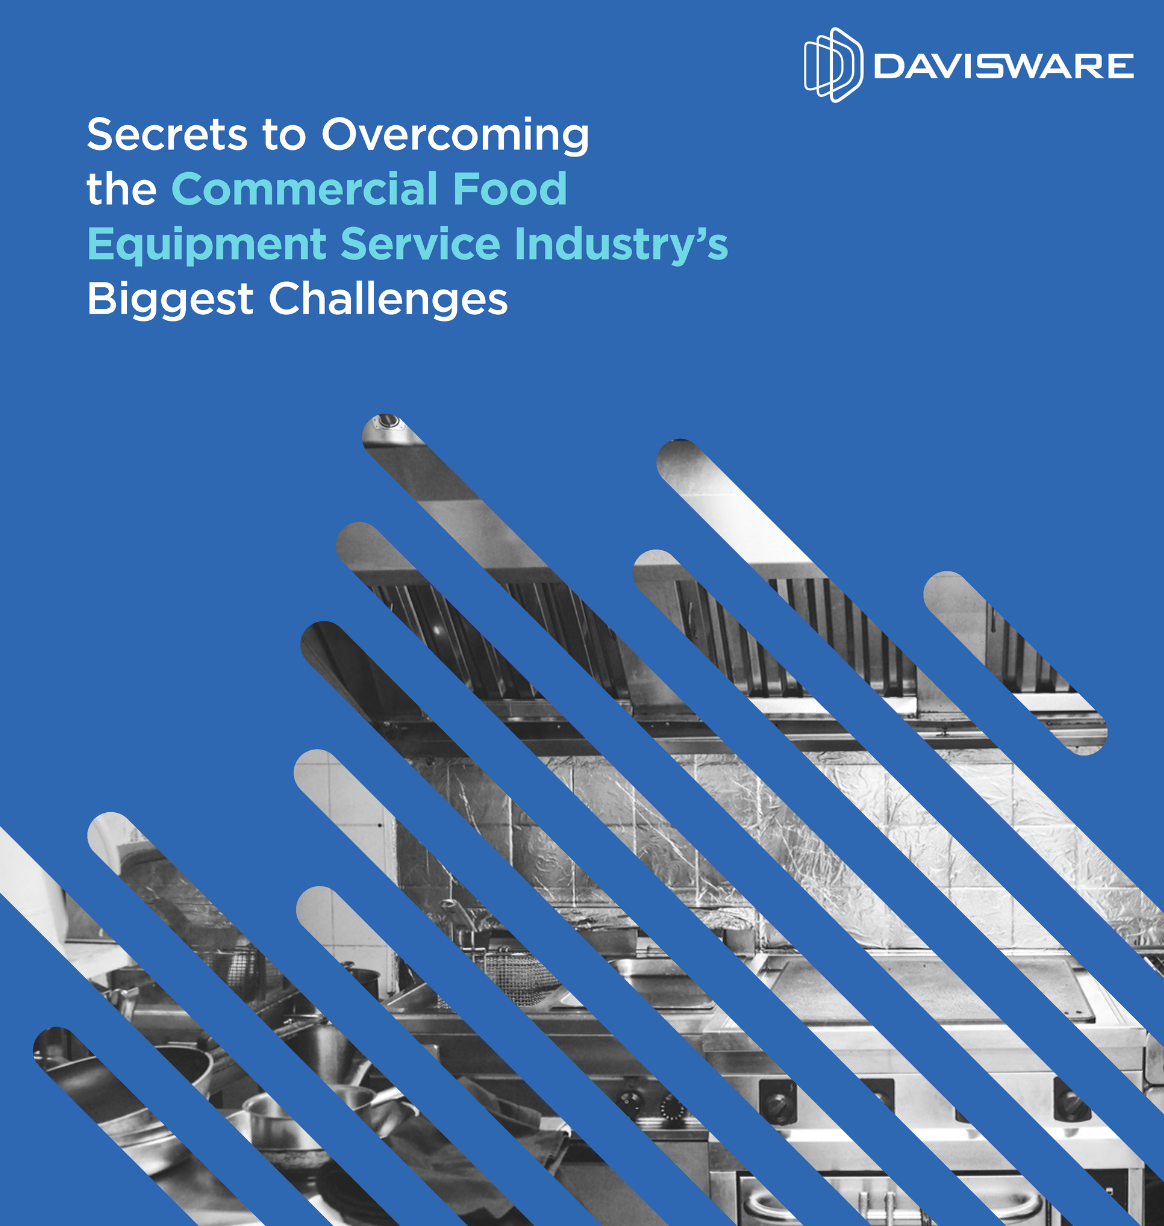 Secrets to overcoming CFES Biggest Challenges_EB cover_05.23